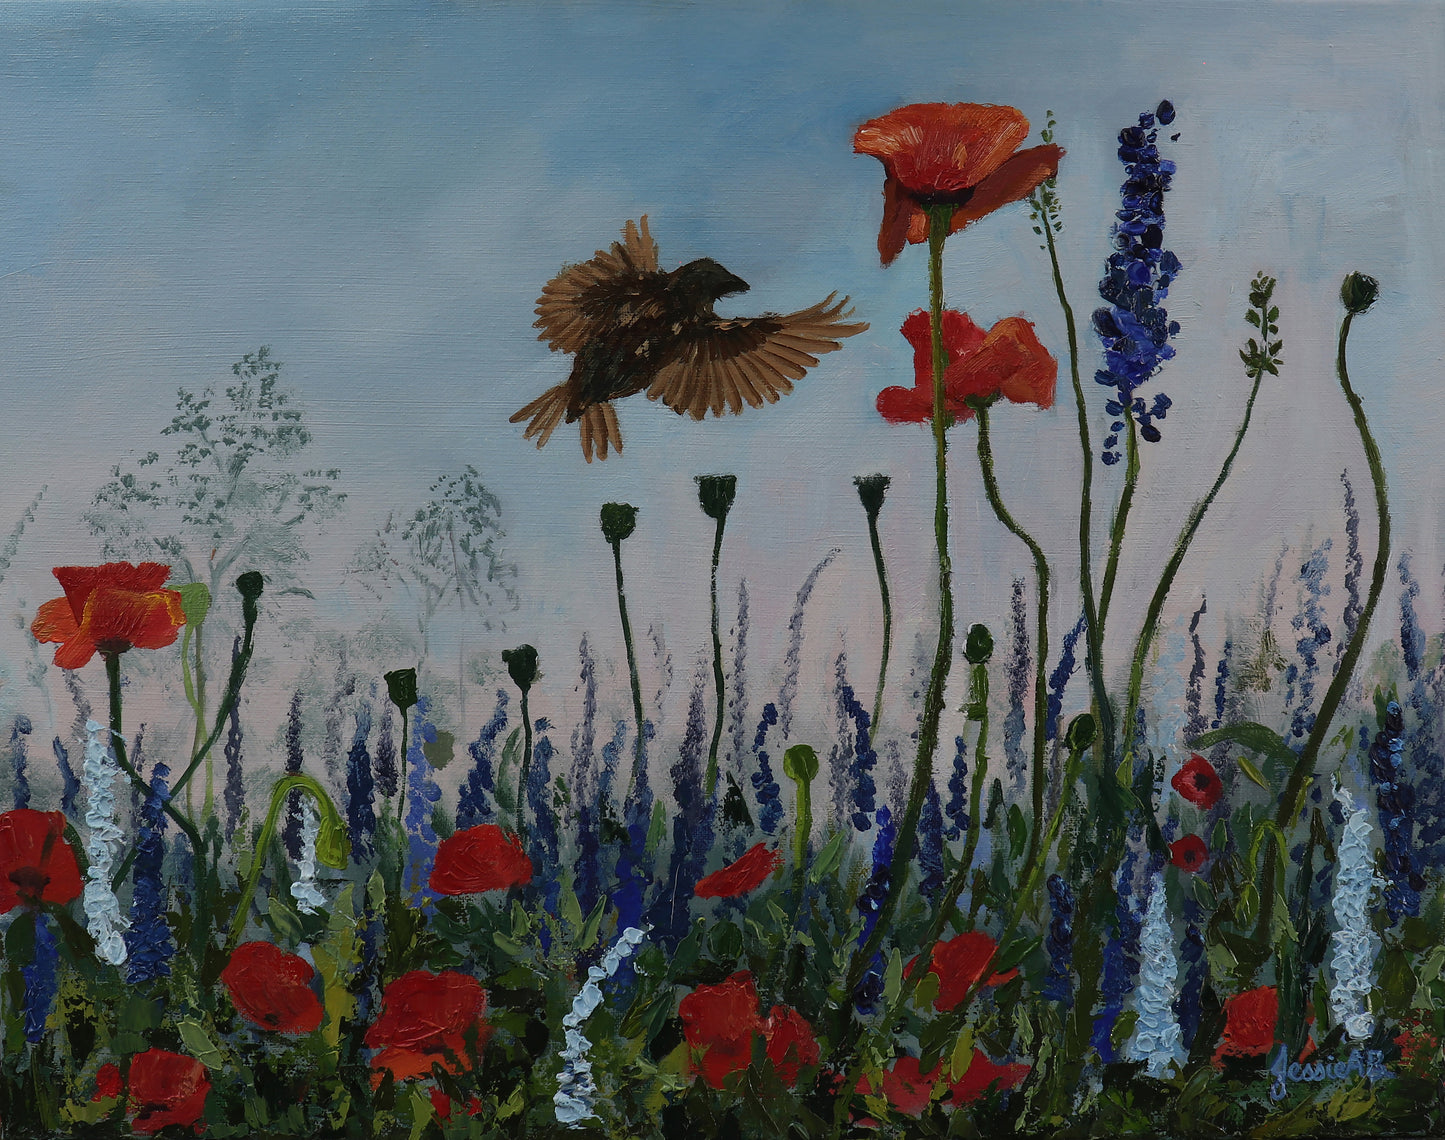 Original painting of right canvas of two birds flying among poppy fields